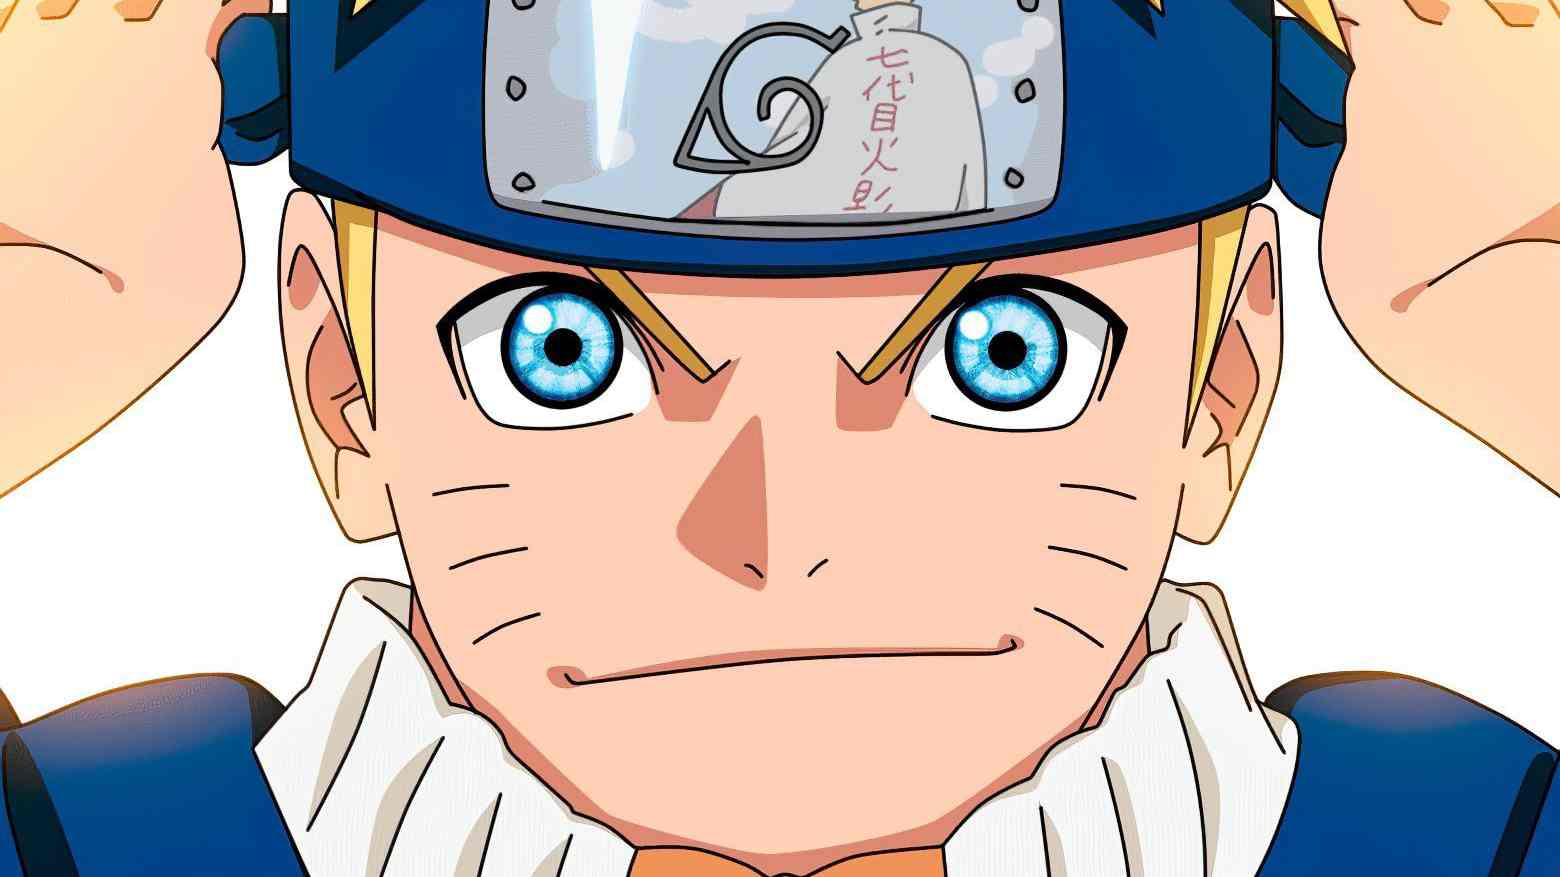 Will you be able to enjoy the Boruto Anime as much as Naruto? - Quora